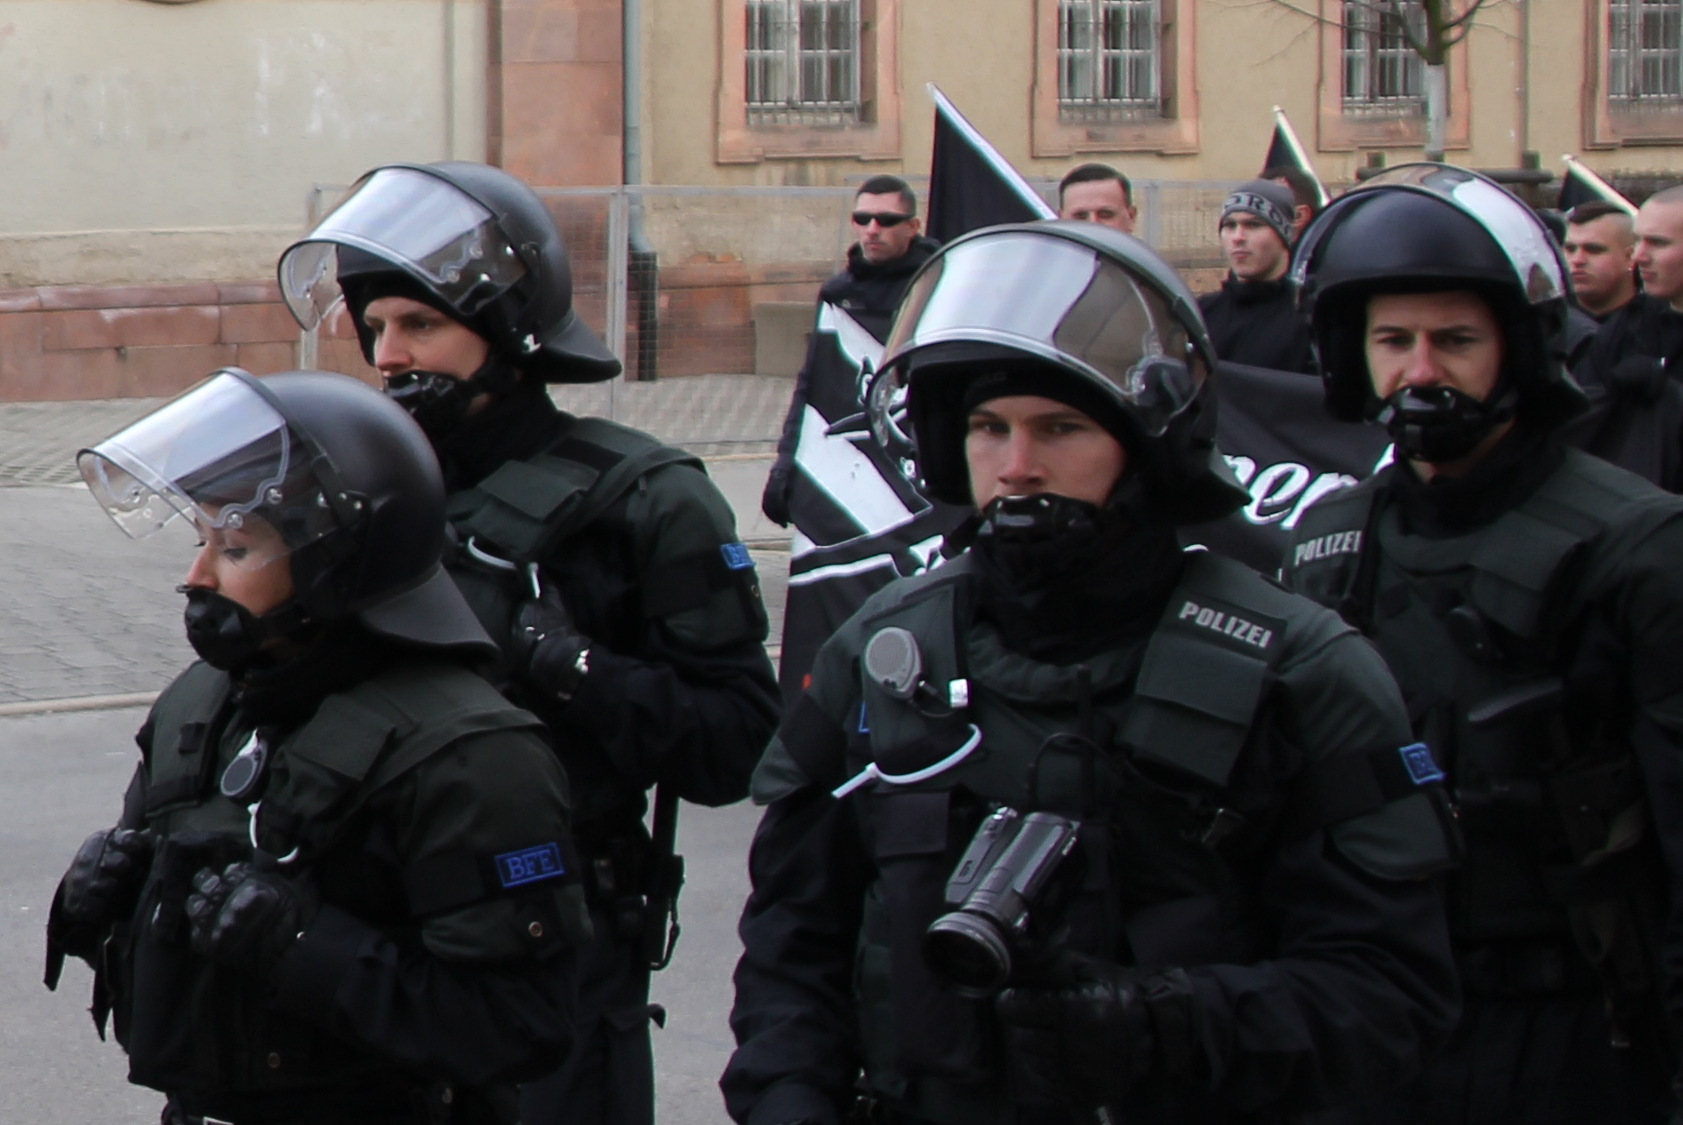 a group of police men with helmets and gas masks